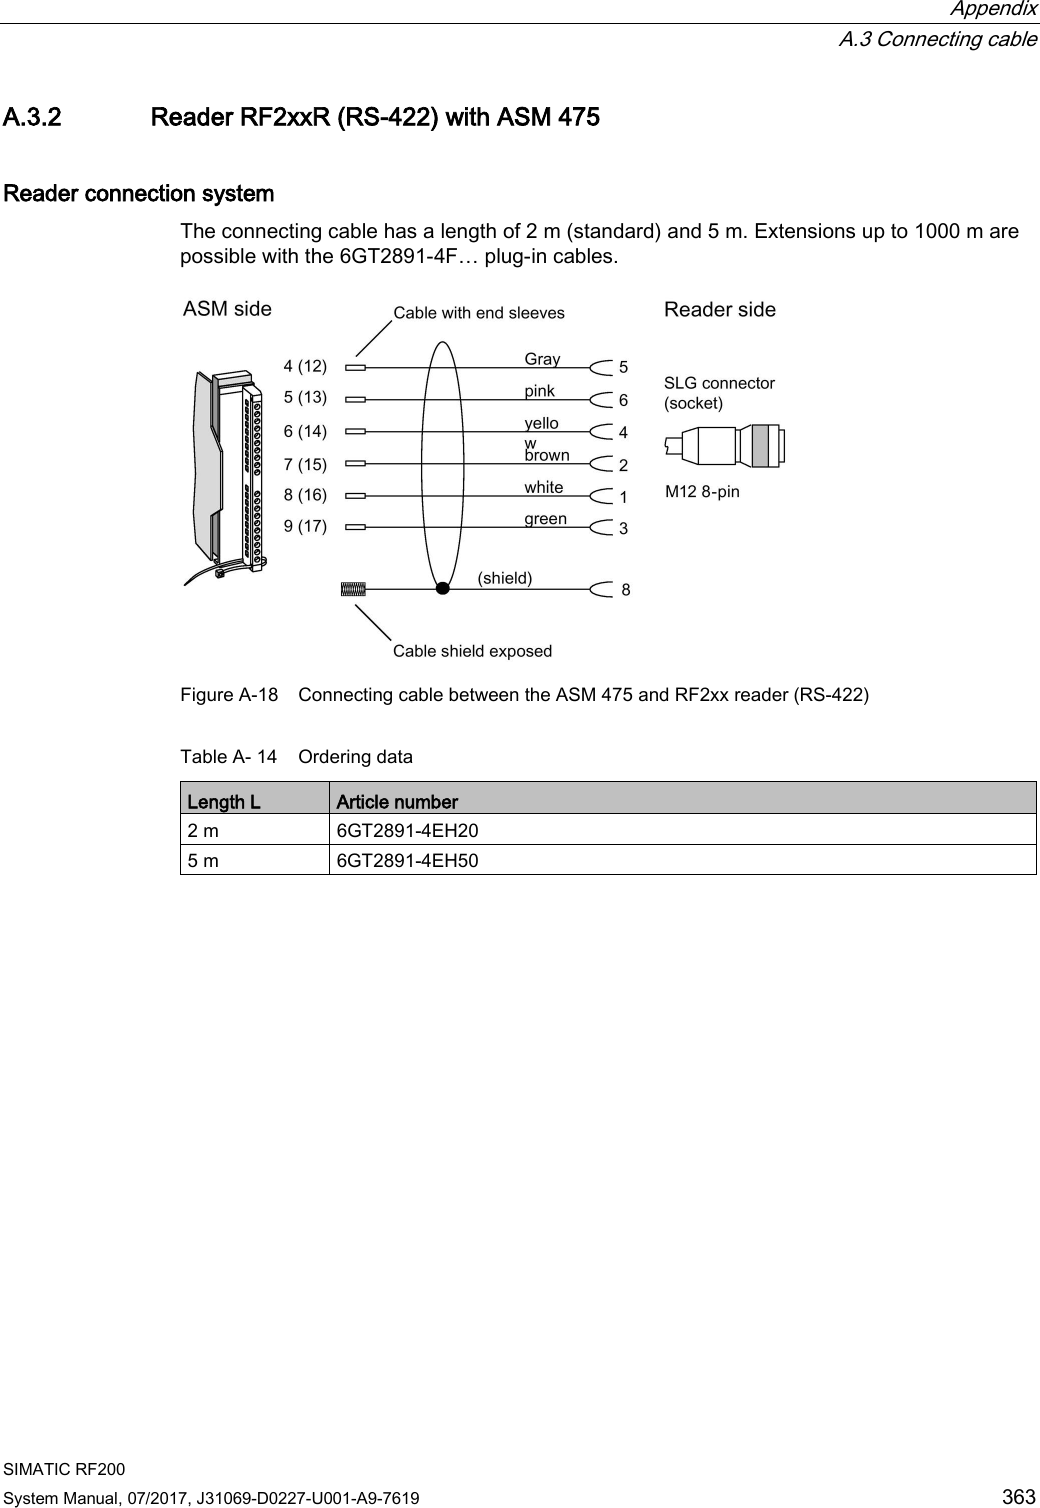  Appendix  A.3 Connecting cable SIMATIC RF200 System Manual, 07/2017, J31069-D0227-U001-A9-7619 363 A.3.2 Reader RF2xxR (RS-422) with ASM 475 Reader connection system The connecting cable has a length of 2 m (standard) and 5 m. Extensions up to 1000 m are possible with the 6GT2891-4F… plug-in cables.   Figure A-18 Connecting cable between the ASM 475 and RF2xx reader (RS-422) Table A- 14 Ordering data Length L Article number 2 m 6GT2891-4EH20 5 m 6GT2891-4EH50 